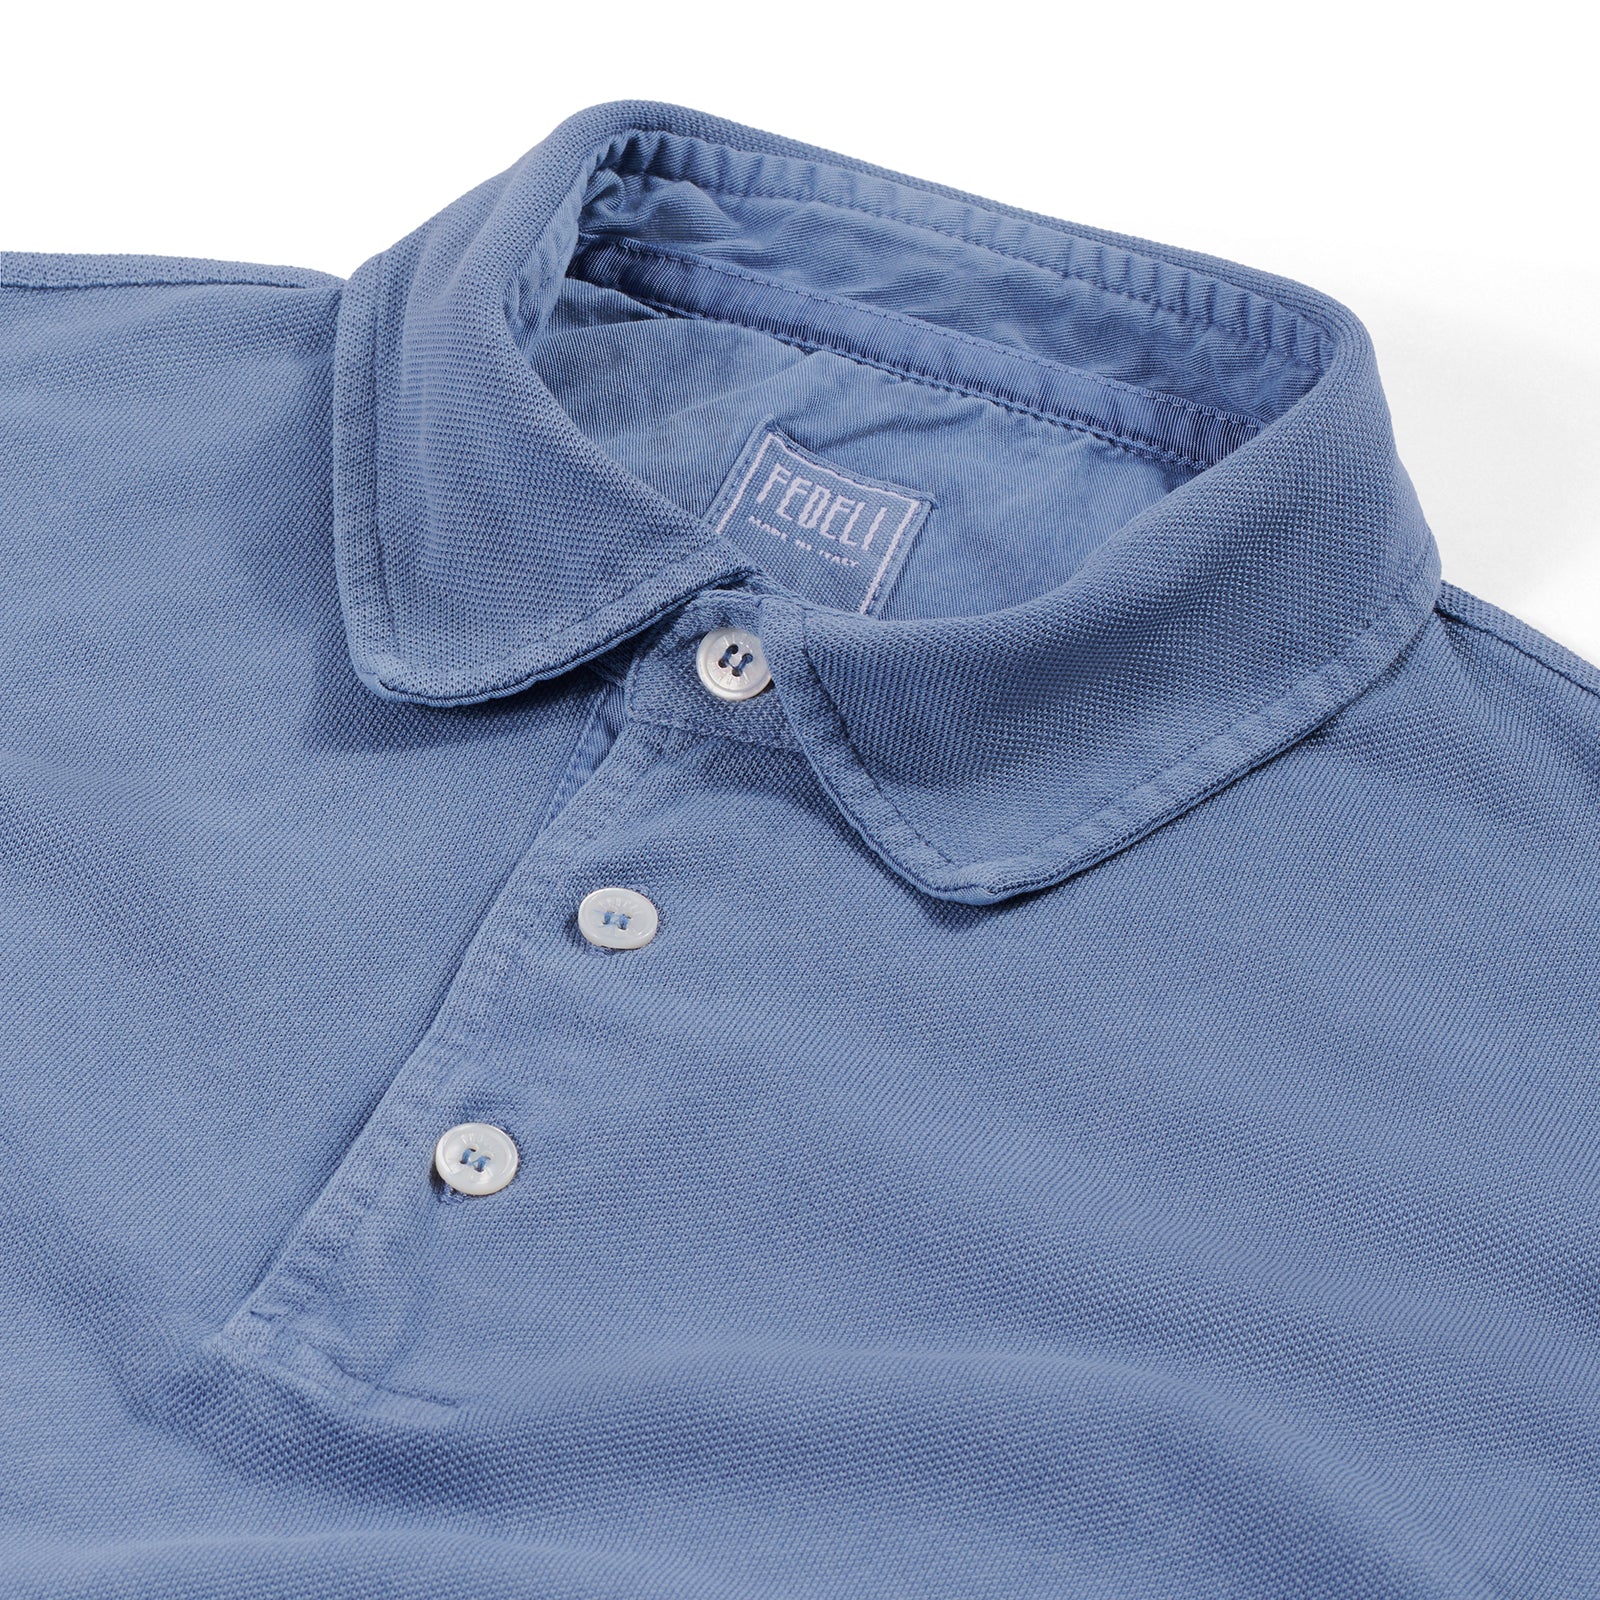 Fedeli Classic Short Sleeve Knitted Piqué Polo Shirt in Steel Blue